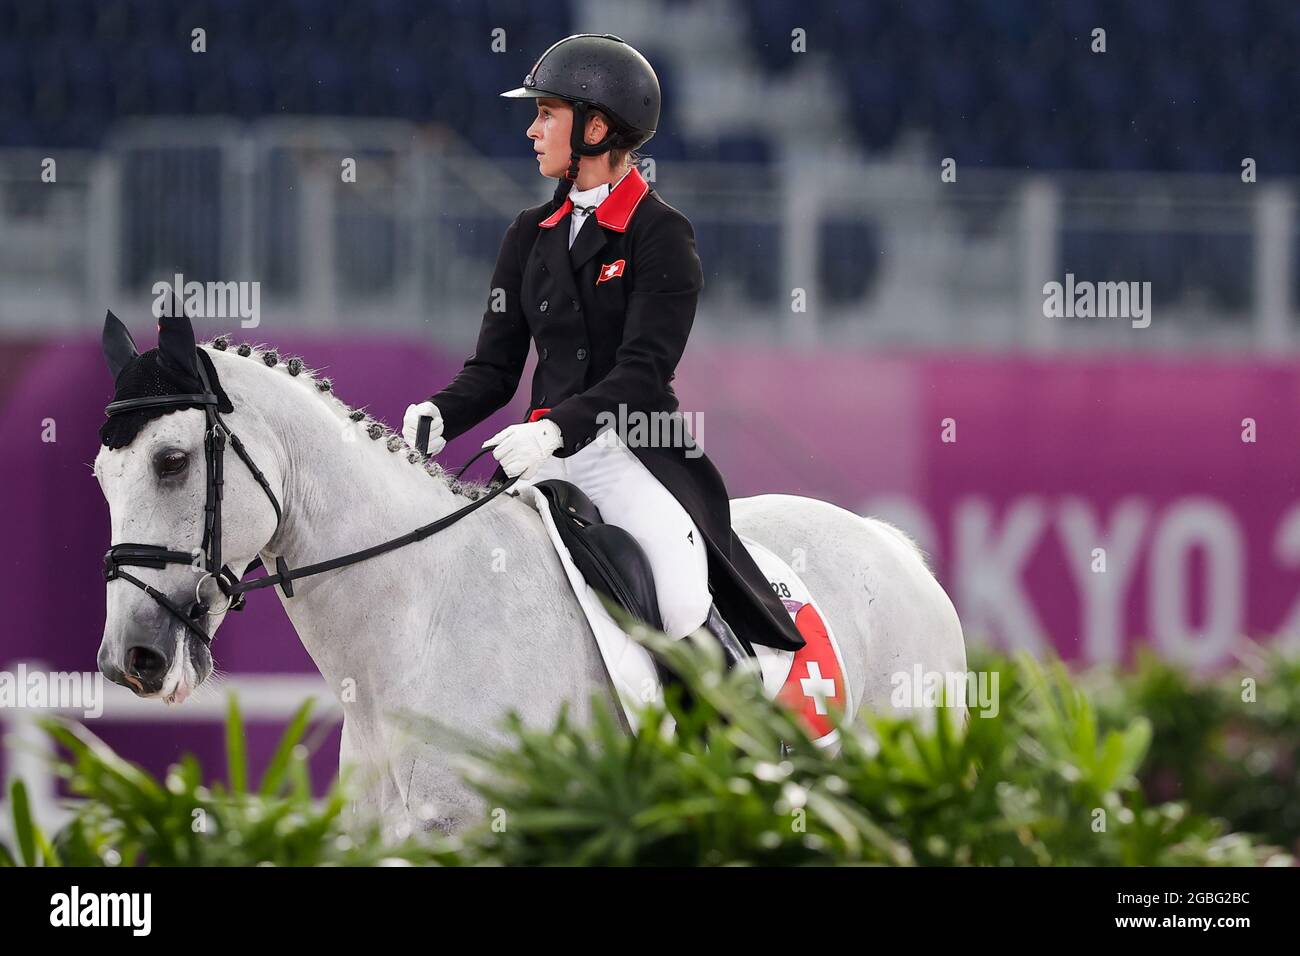 TOKYO, JAPAN - JULY 30: Melody Johner of Switzerland competing on Eventing  Dressage Team and Individual during the Tokyo 2020 Olympic Games at the  Equestrian Park on July 30, 2021 in Tokyo,